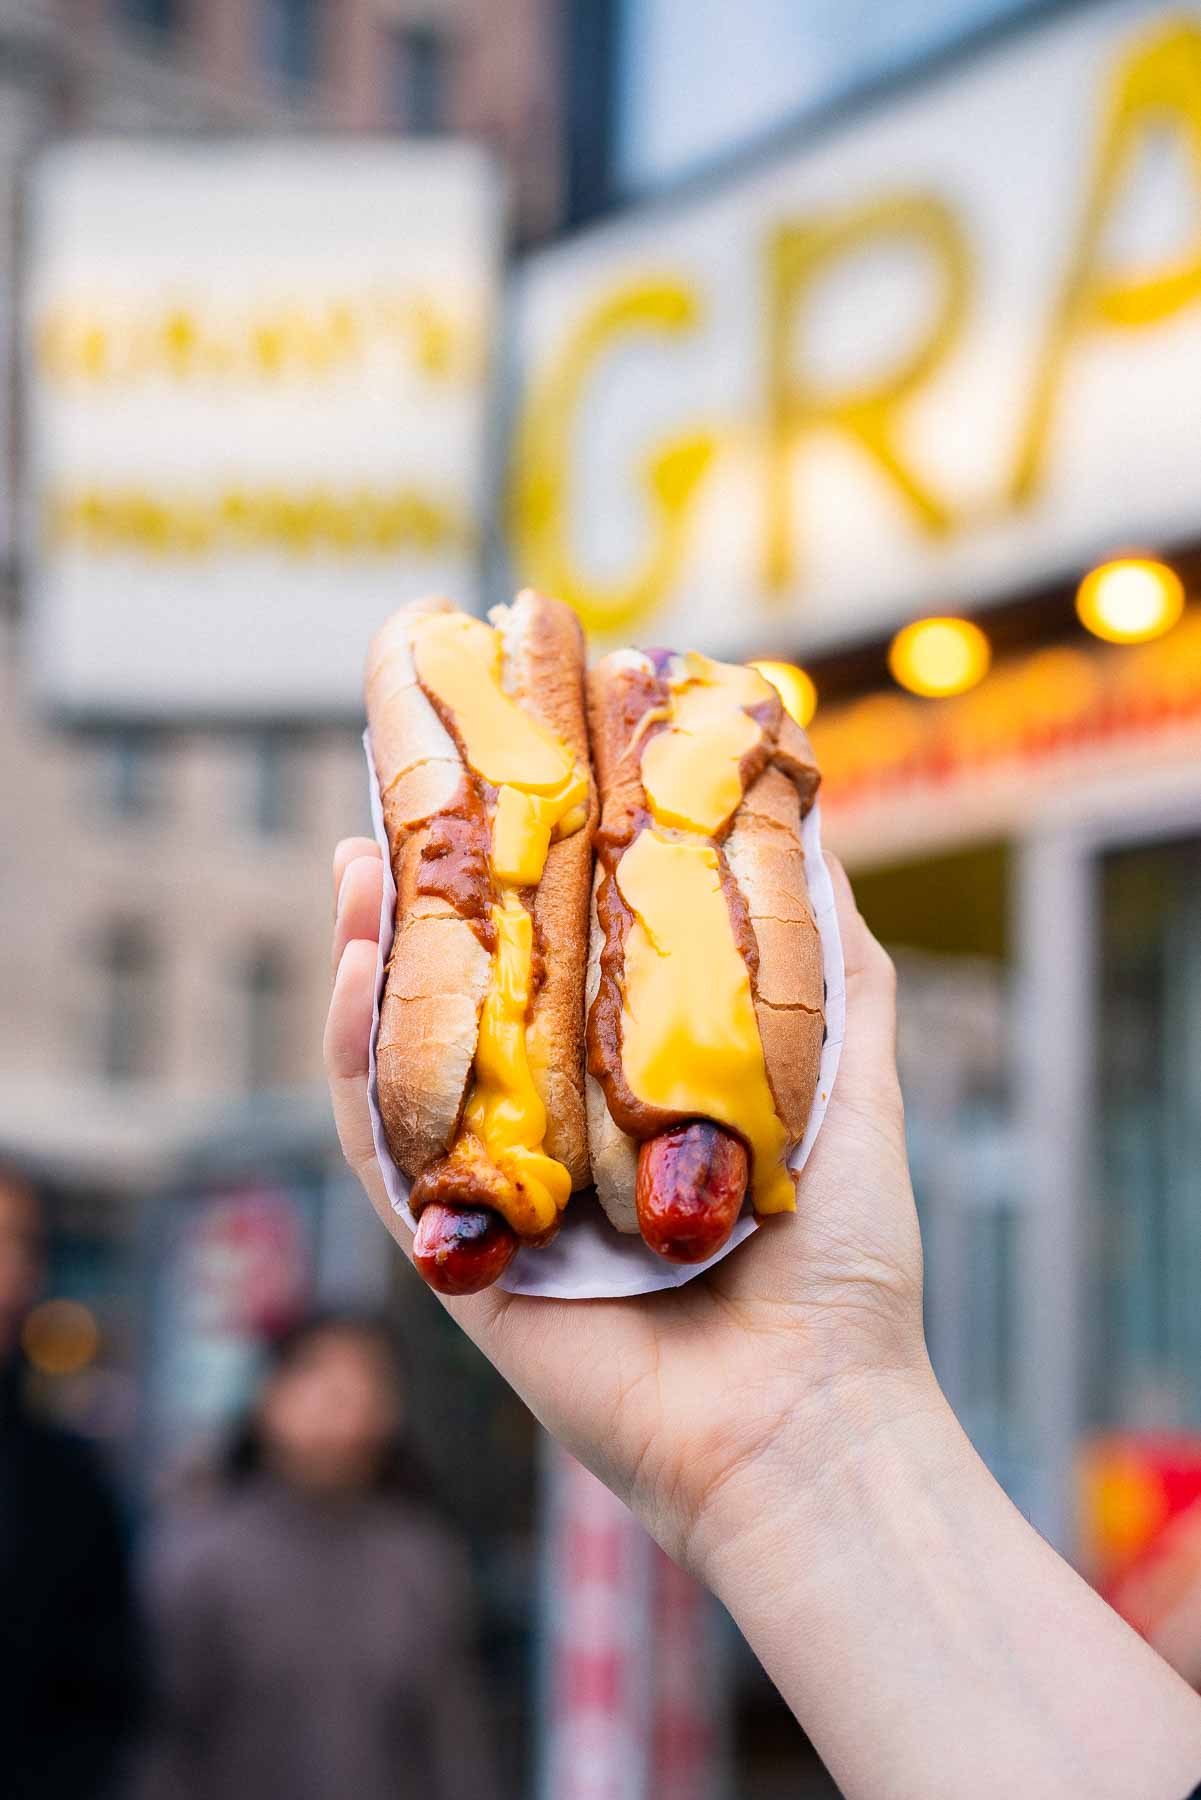 2 Chili Cheese Dogs from Grays Papaya in the Upper West Side, Iconic New York City foods to try